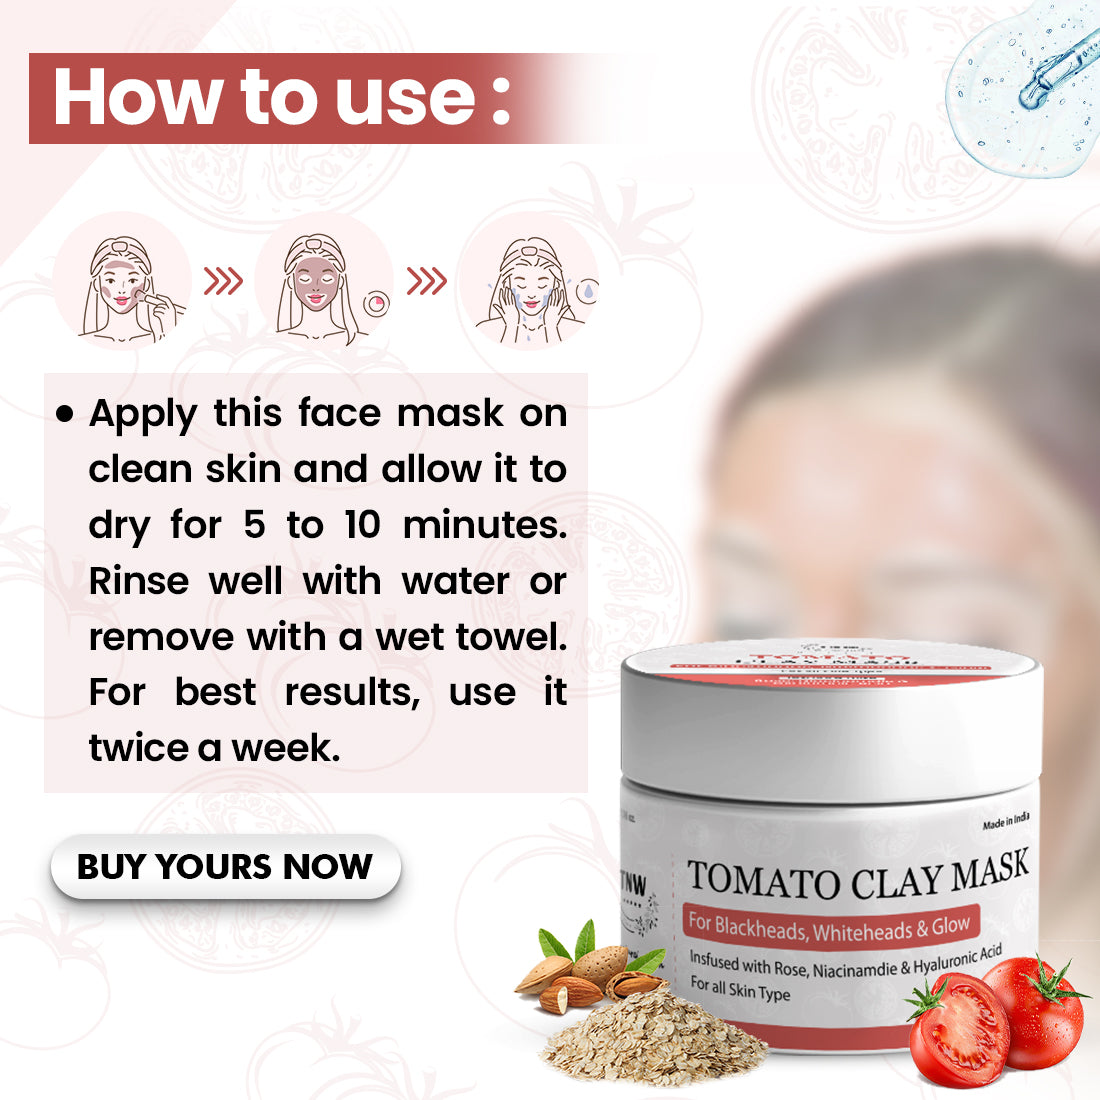 How to use Tomato Clay Mask